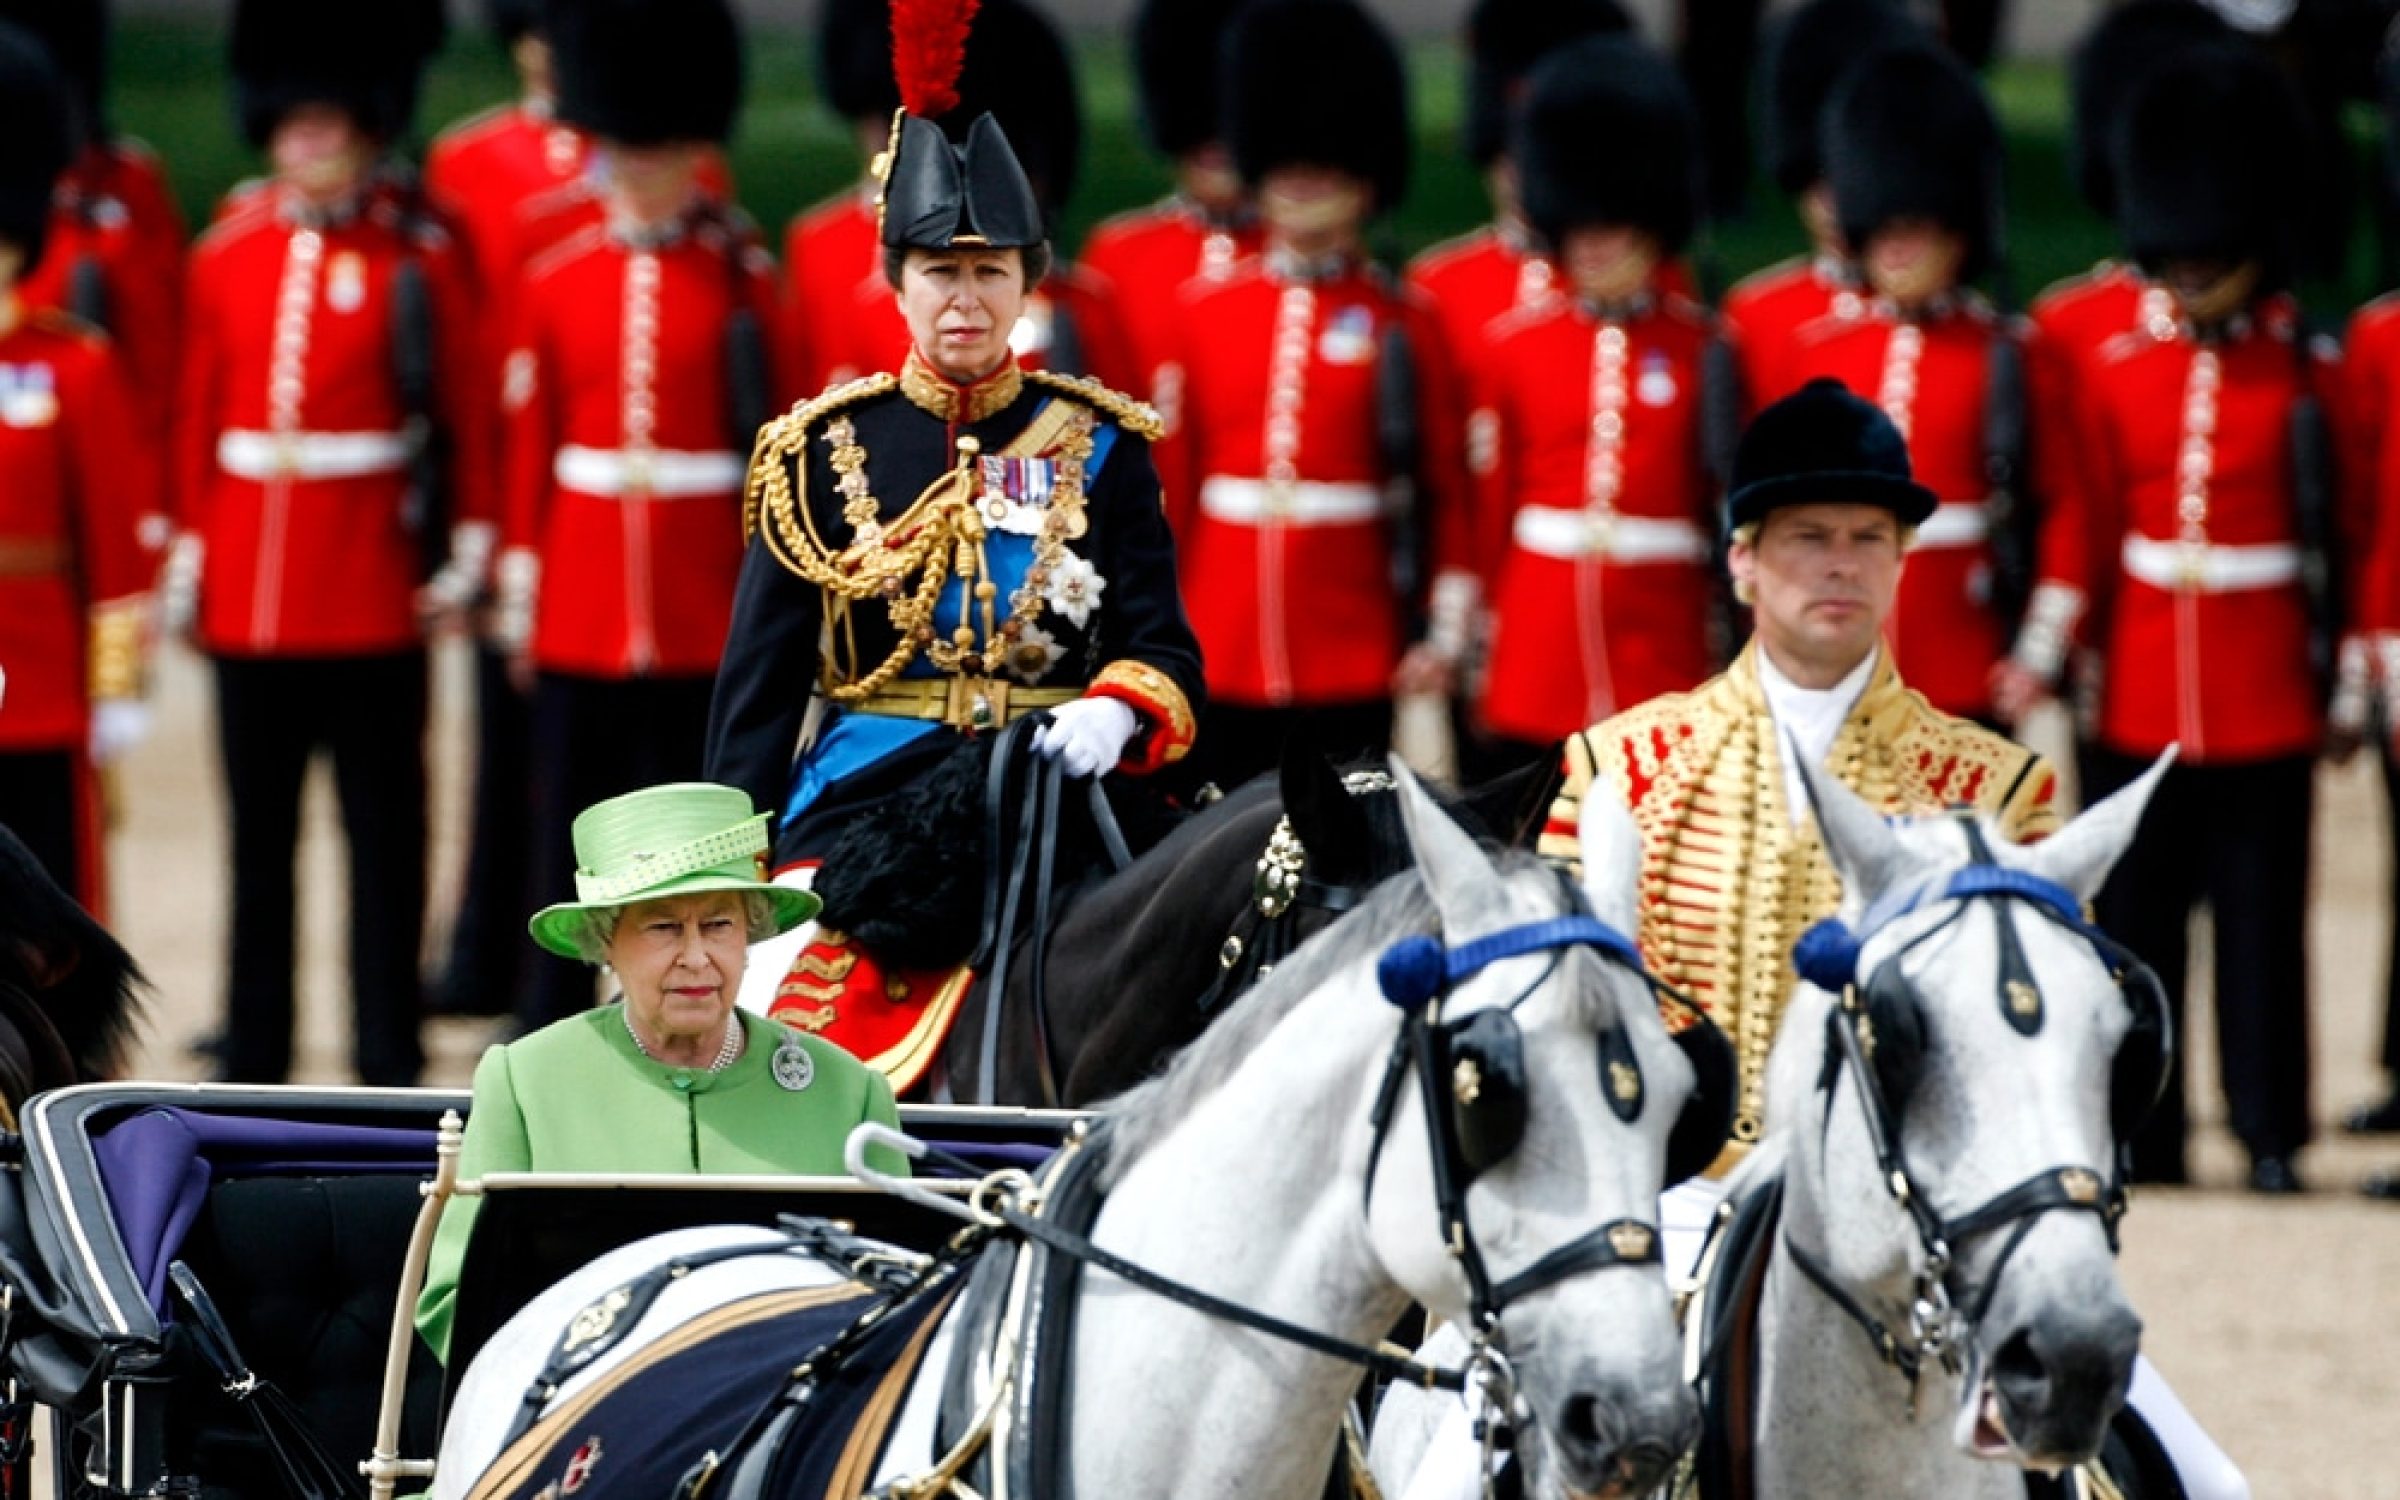 The Queen's birthday, trooping the colour, British monarchy